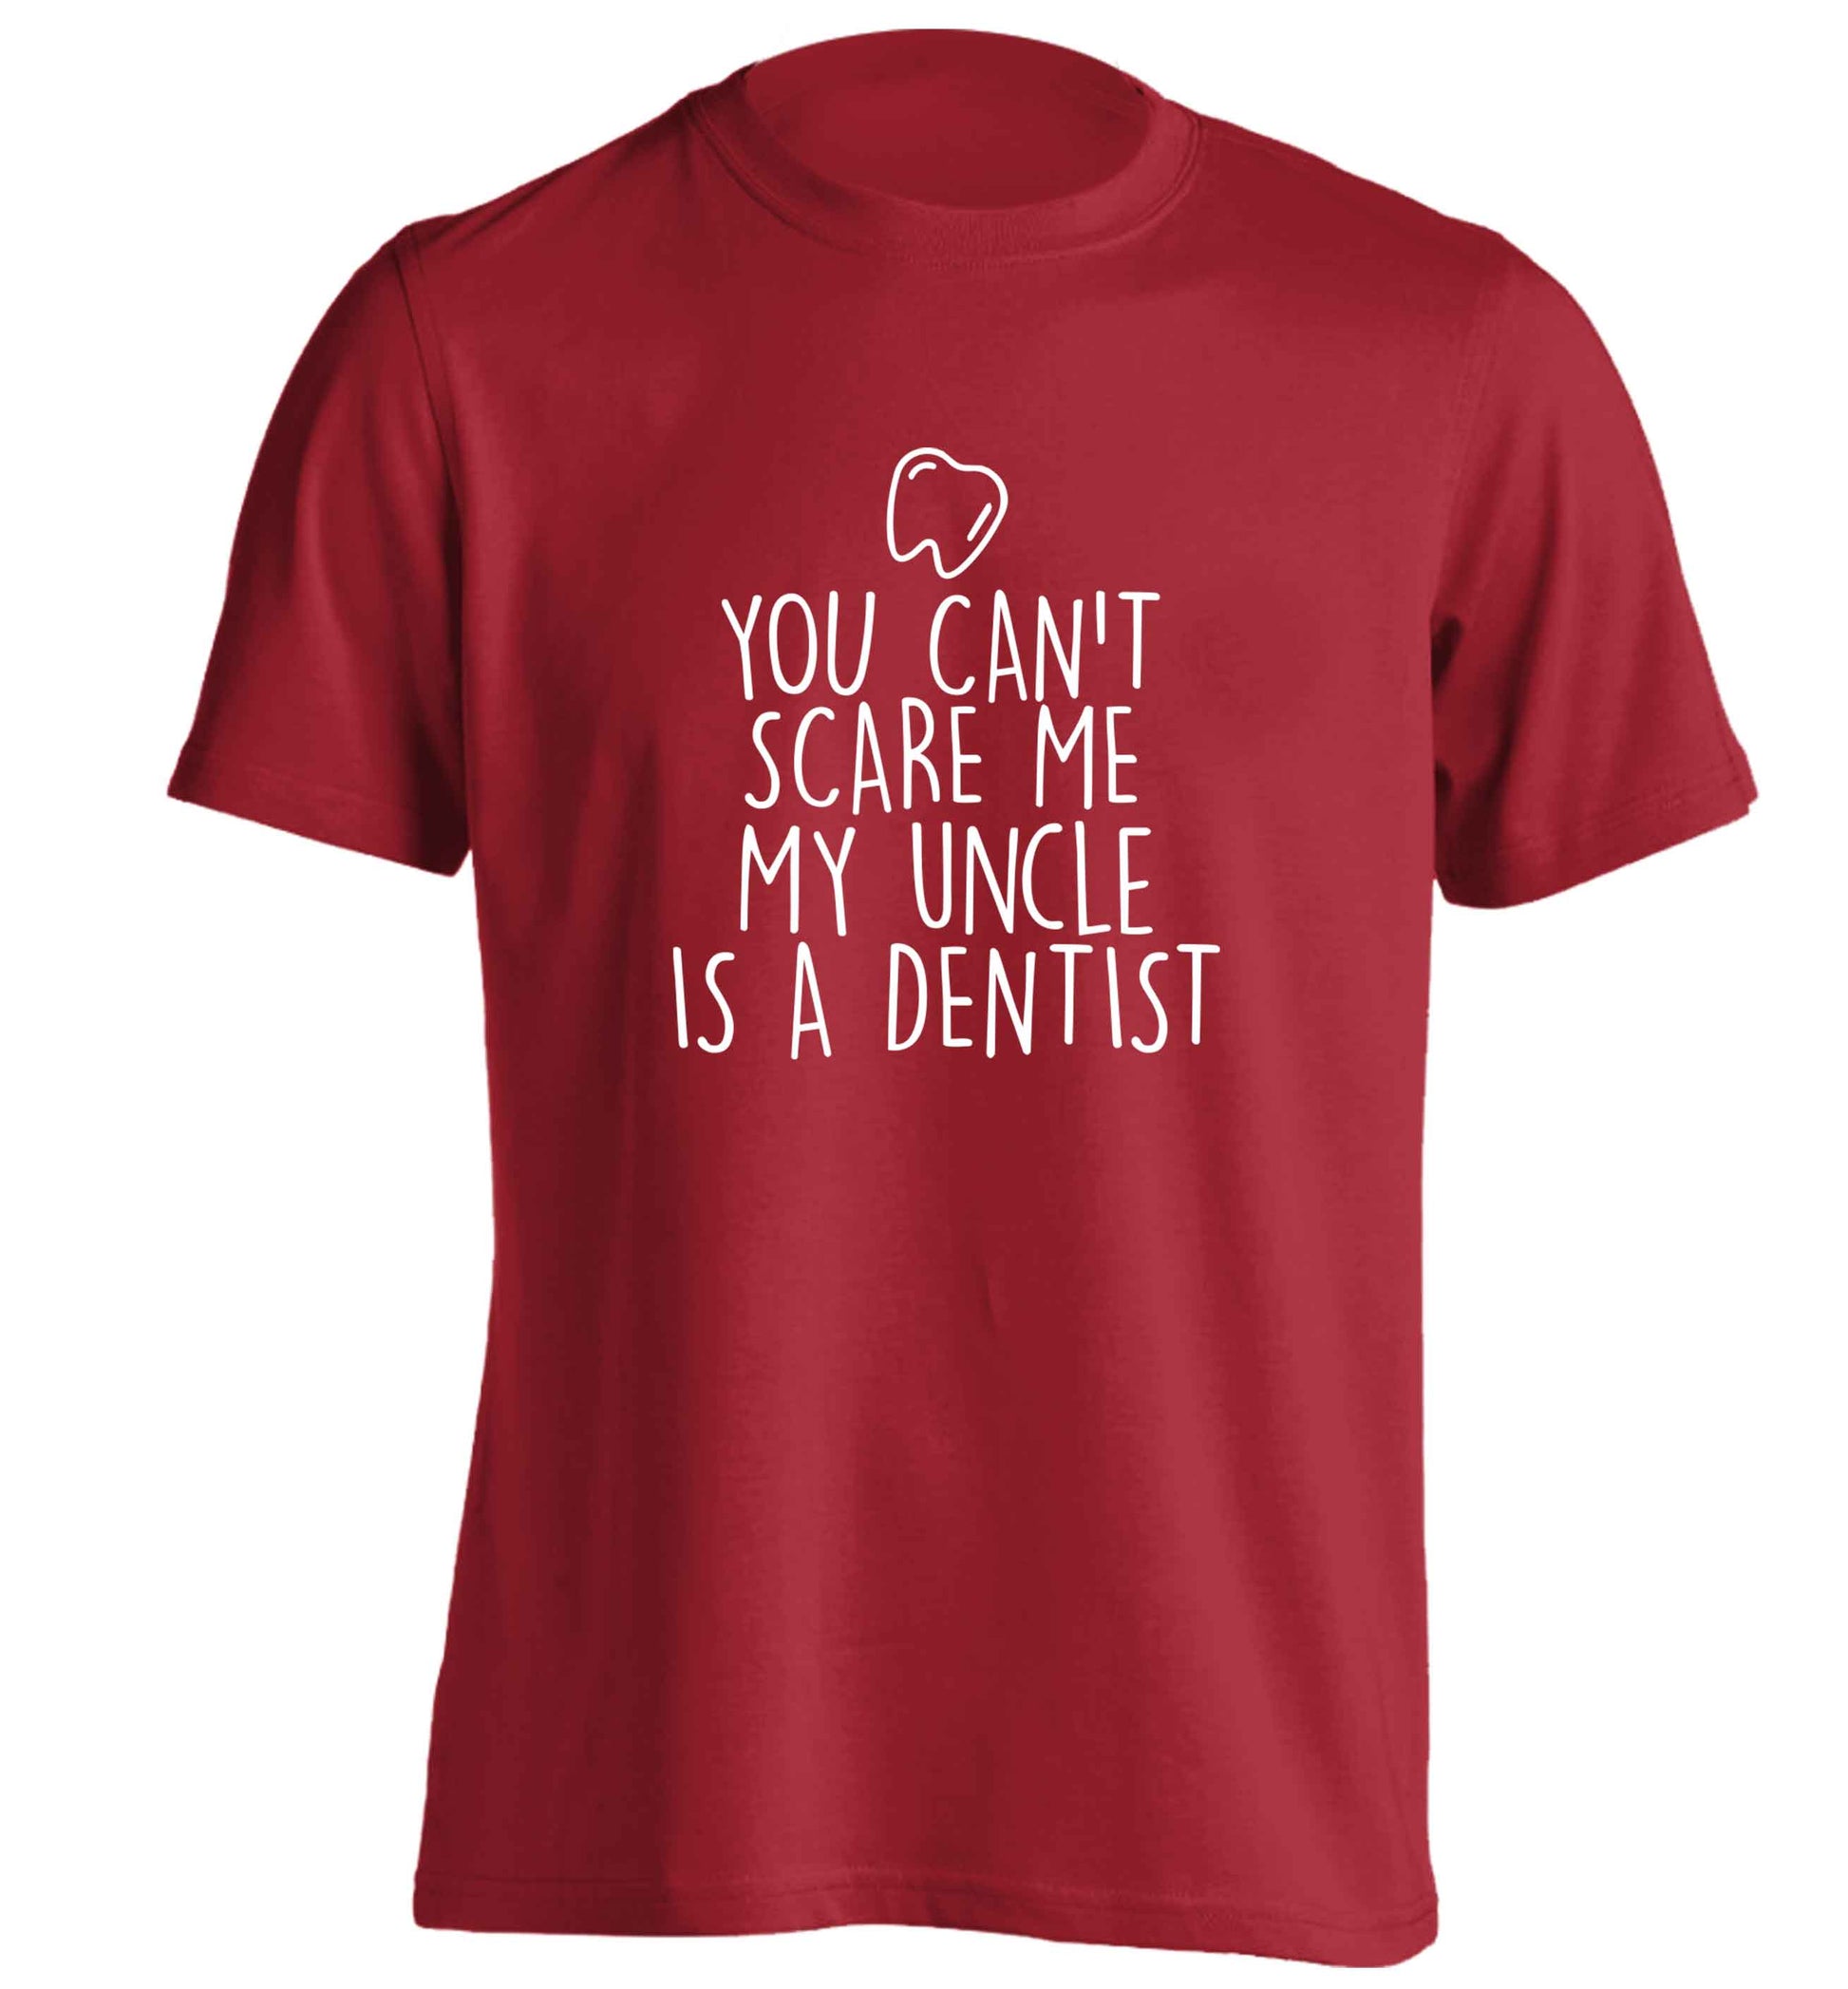 You can't scare me my uncle is a dentist adults unisex red Tshirt 2XL